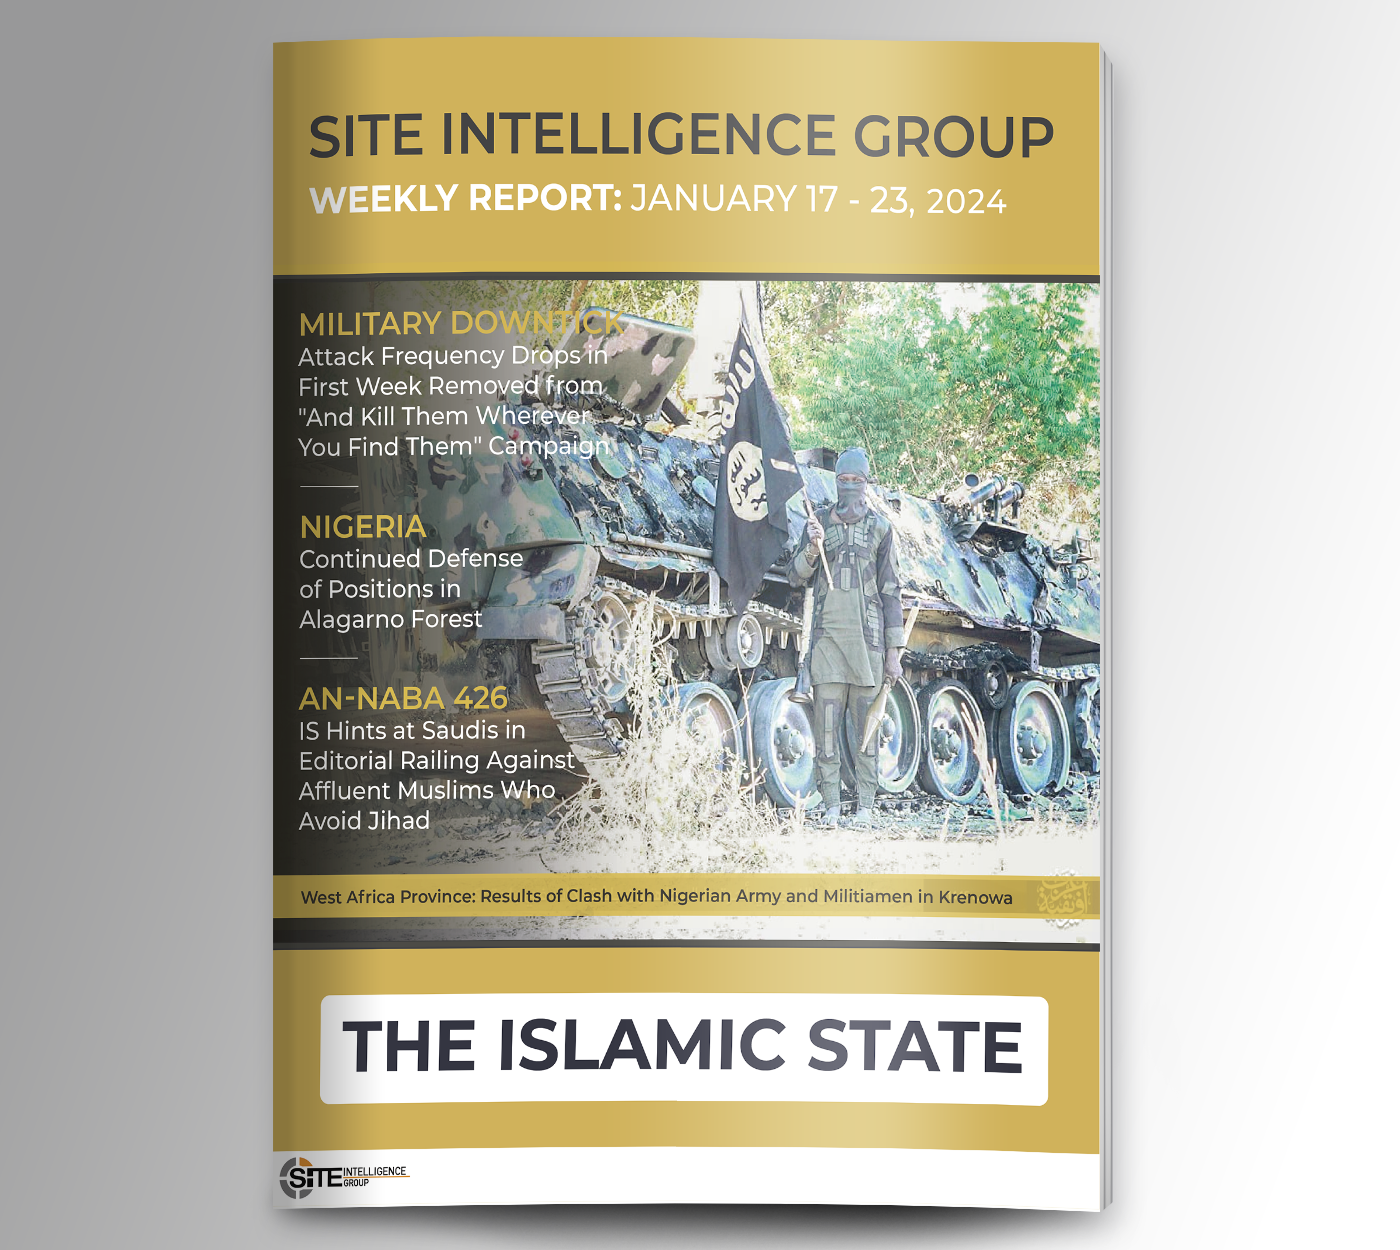 Weekly inSITE on the Islamic State for January 17-23, 2024